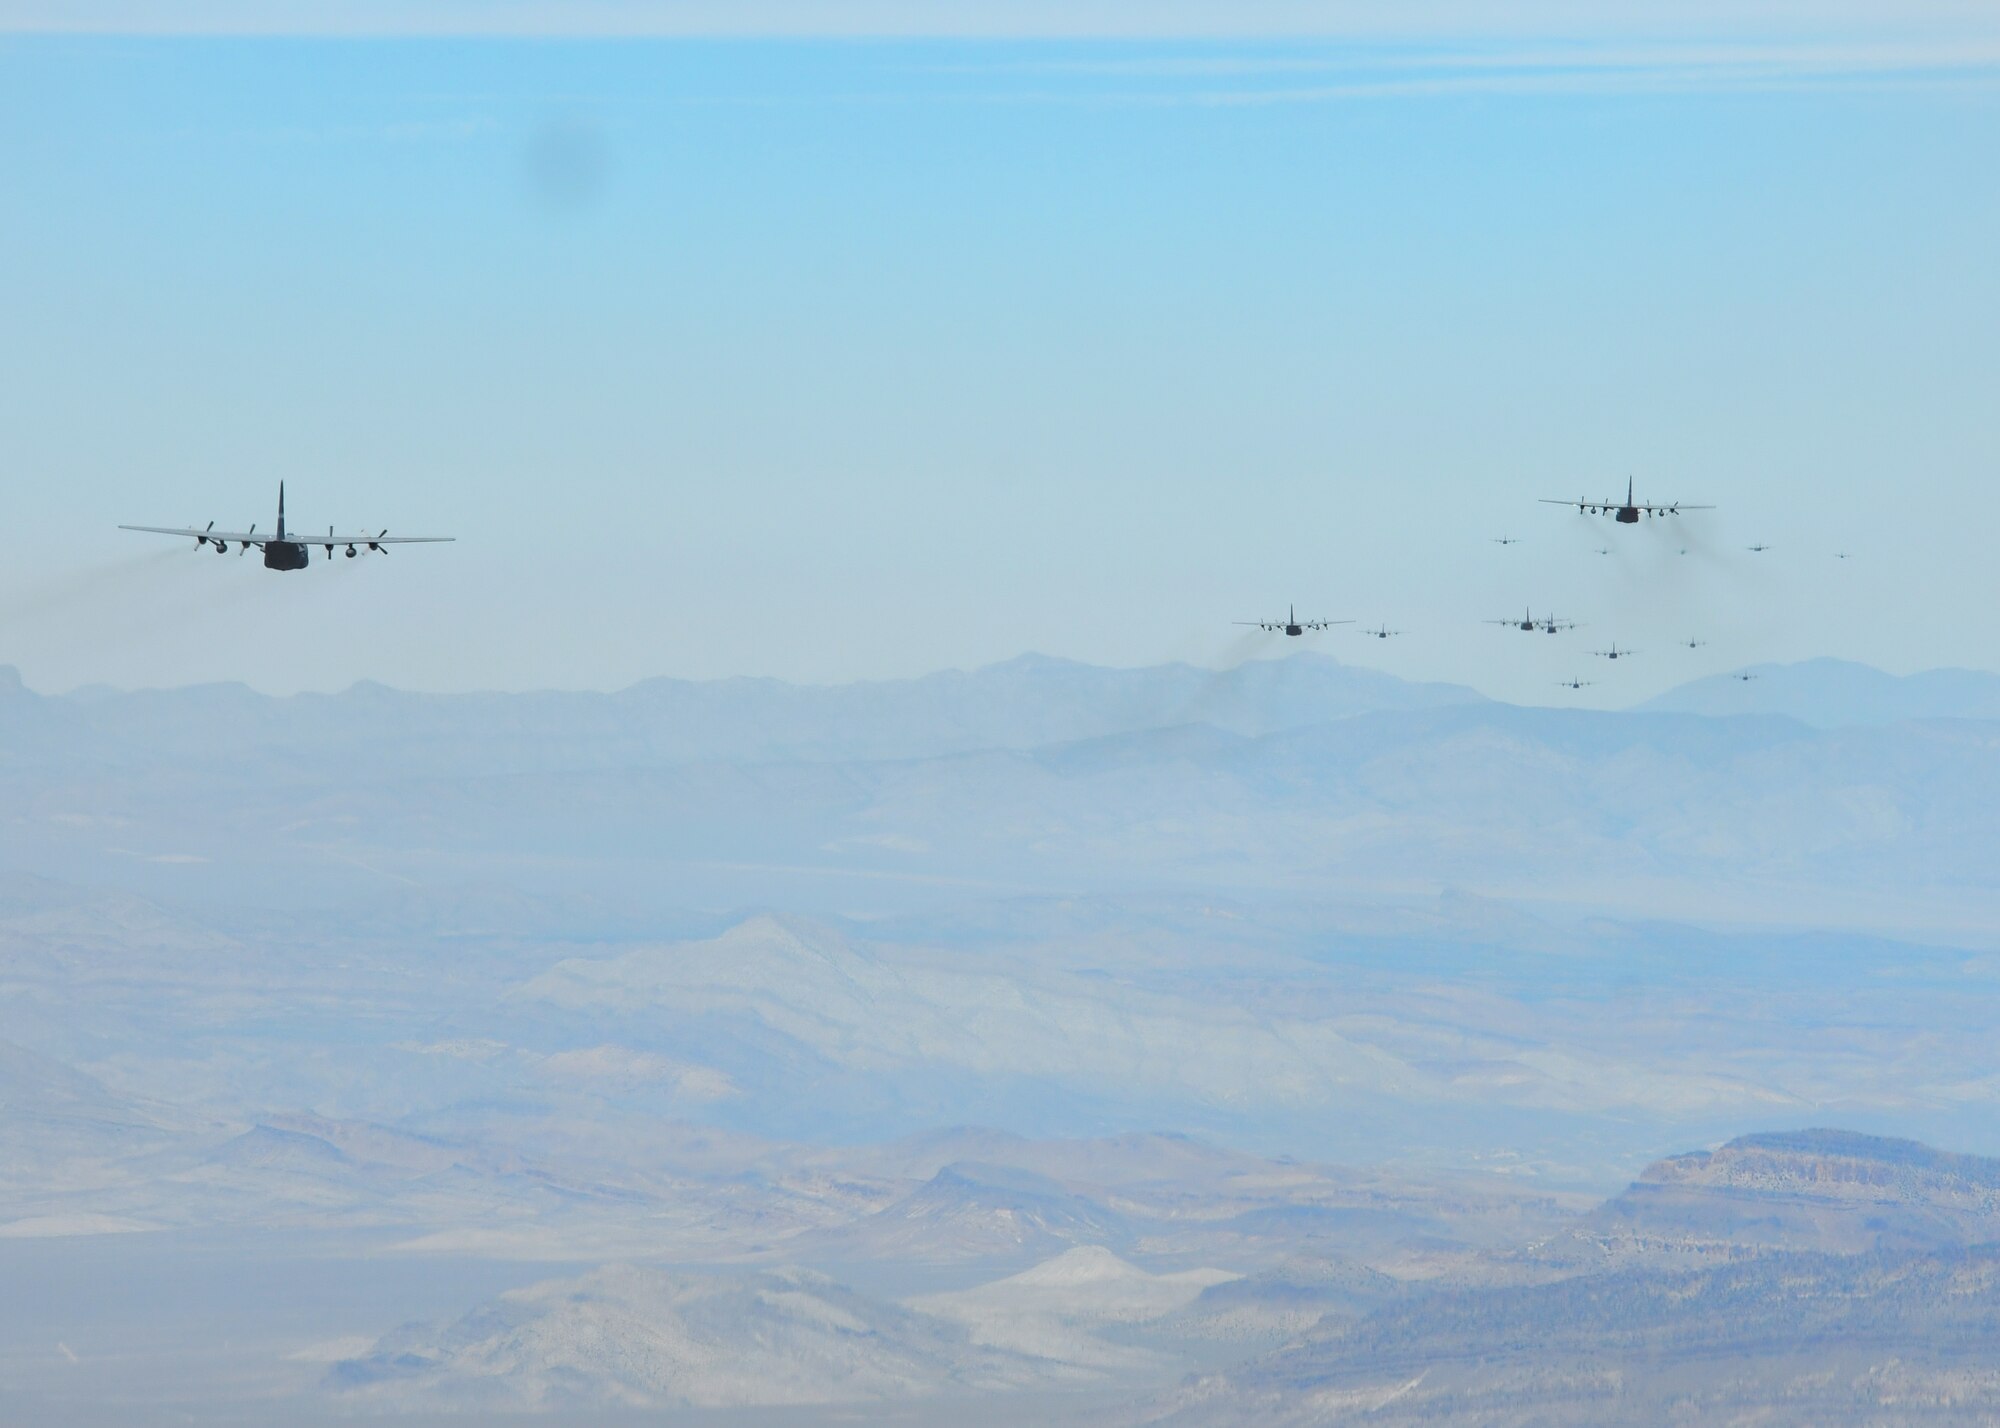 A fleet of C-130 aircraft fly in formation to participate in an exercise outside of Nellis Air Force Base, Nevada, June 10, 2017. The Joint Forcible Entry exercise, known as JFE Vul, is hosted and led by students graduating from the United States Air Force Weapons School twice a year, and tested the ability for various units and aircraft platforms to work together in a contested degraded environment. (U.S. Air Force photo by Staff Sgt. Miles Wilson)